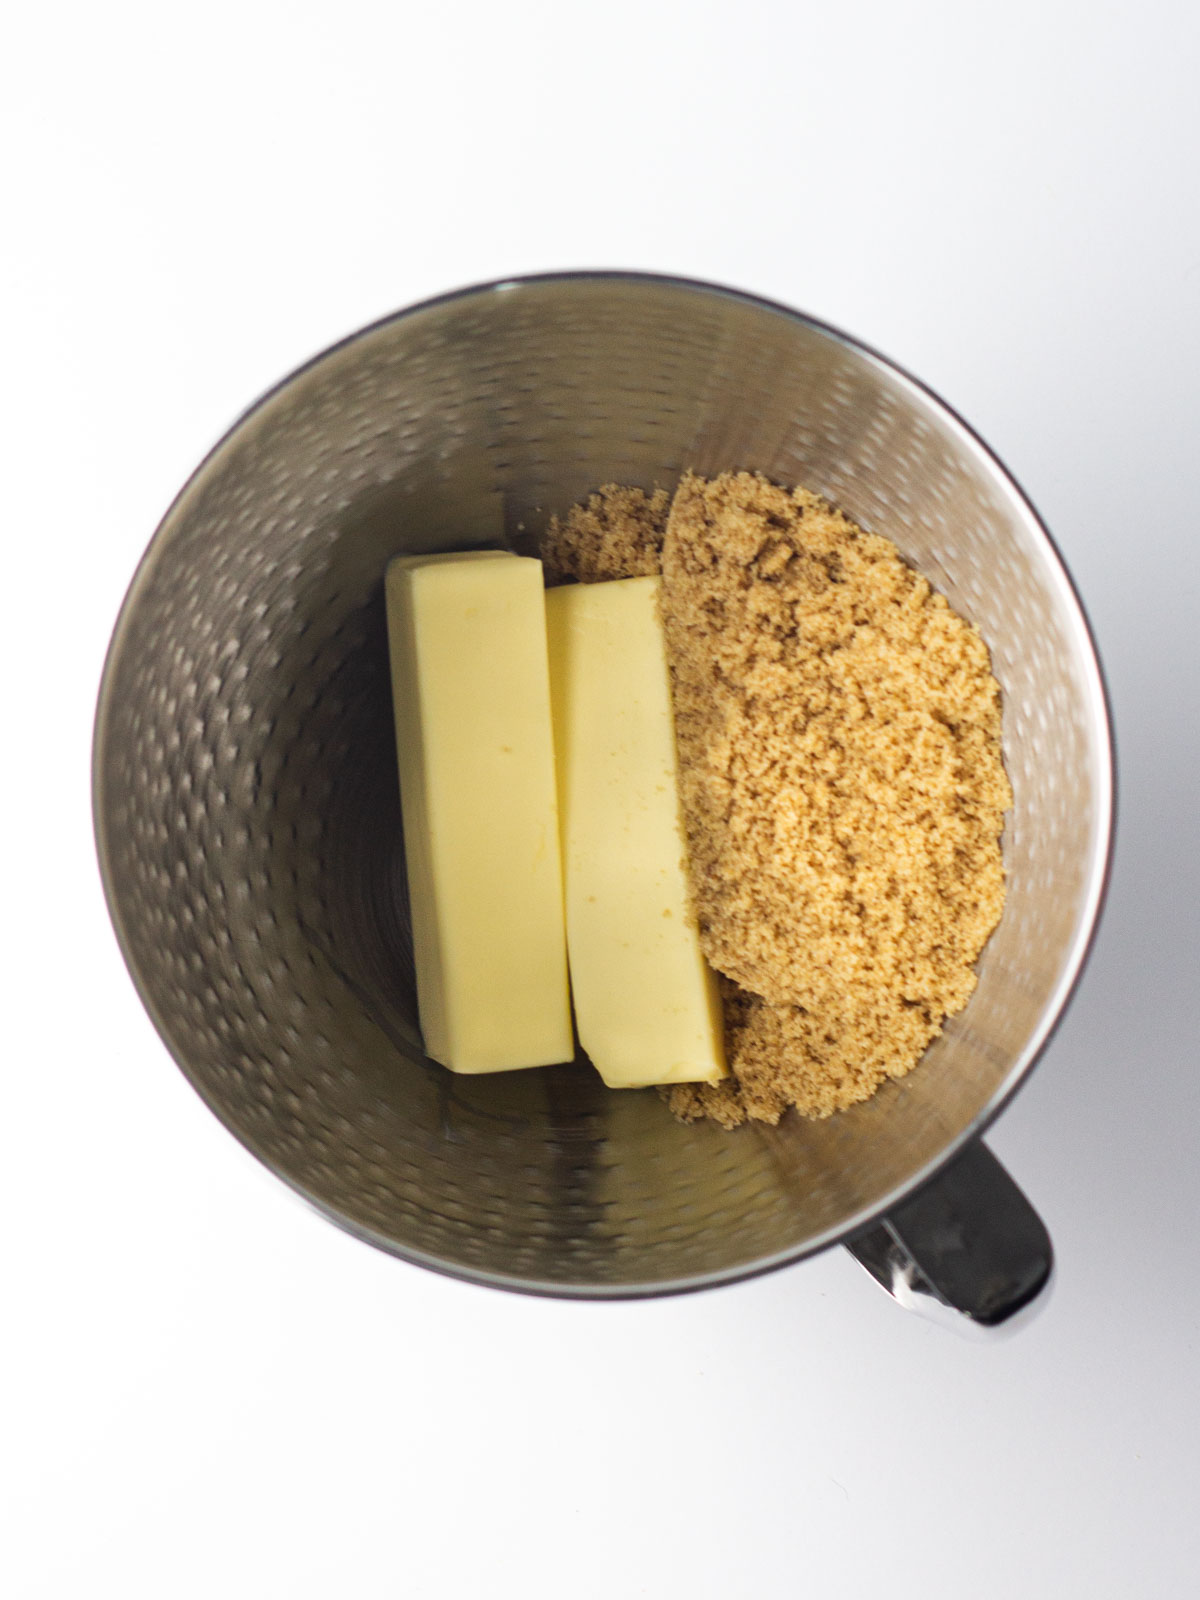 Two sticks of butter and brown sugar in a silver mixing bowl.